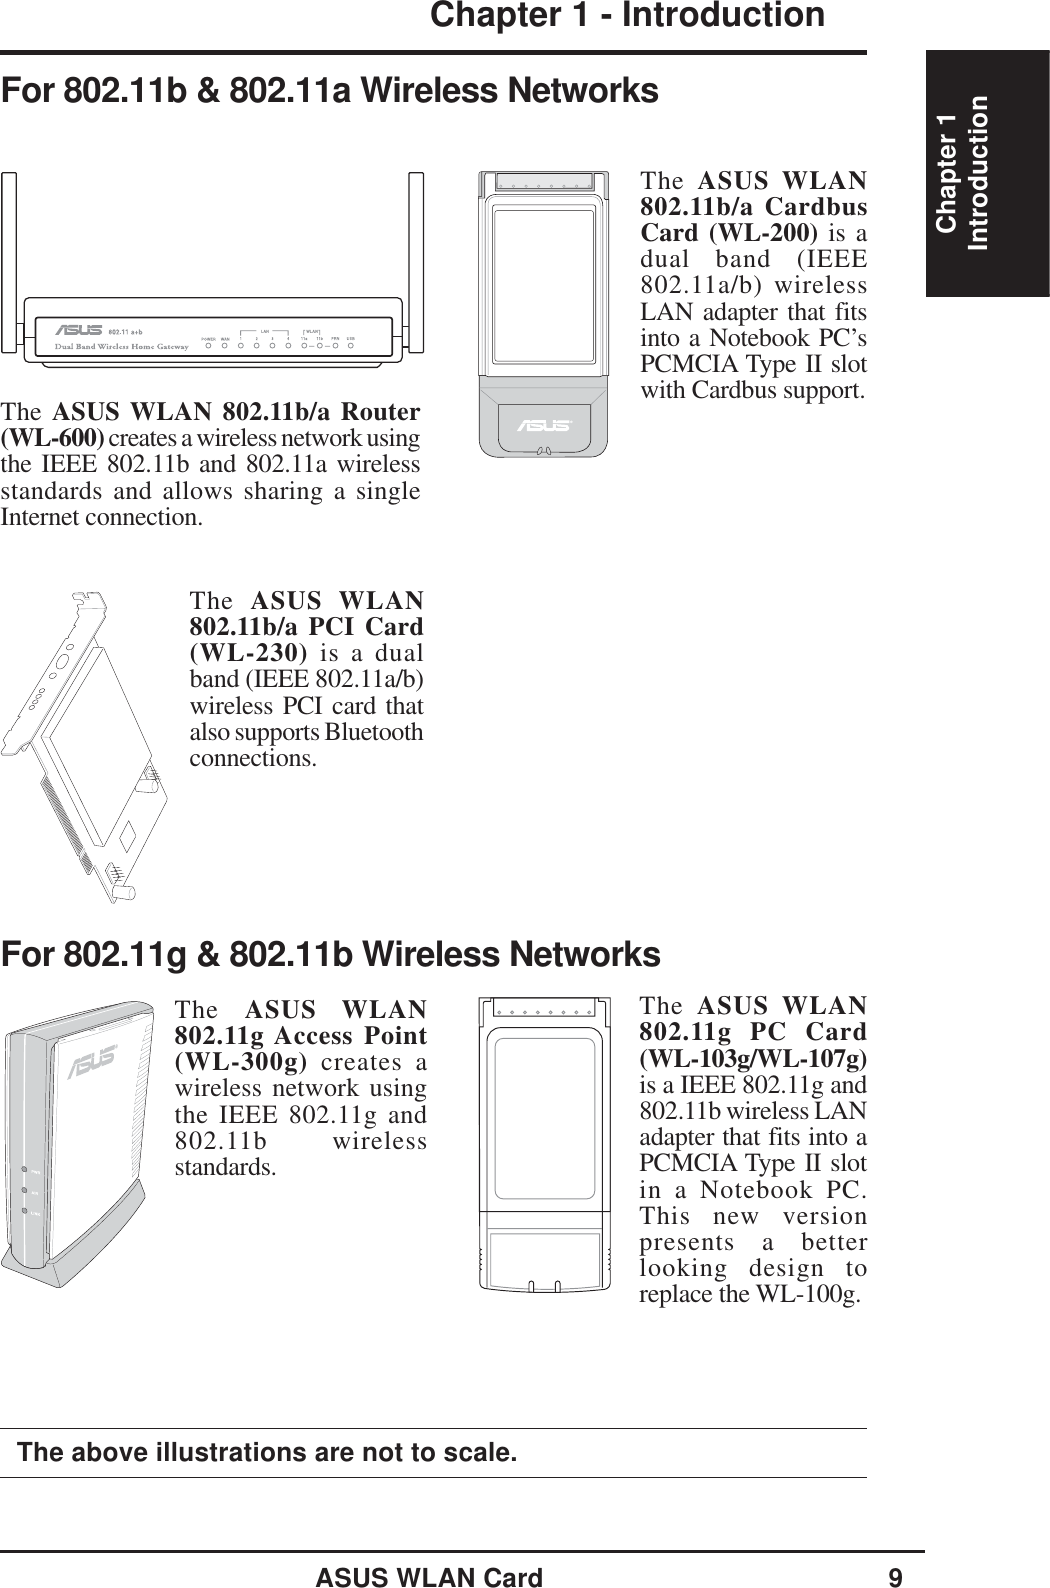 ASUS WLAN Card 9Chapter 1 - IntroductionChapter 1IntroductionThe above illustrations are not to scale.The ASUS WLAN 802.11b/a Router(WL-600) creates a wireless network usingthe IEEE 802.11b and 802.11a wirelessstandards and allows sharing a singleInternet connection.The ASUS WLAN802.11b/a CardbusCard (WL-200) is adual band (IEEE802.11a/b) wirelessLAN adapter that fitsinto a Notebook PC’sPCMCIA Type II slotwith Cardbus support.The ASUS WLAN802.11b/a PCI Card(WL-230) is a dualband (IEEE 802.11a/b)wireless PCI card thatalso supports Bluetoothconnections.For 802.11b &amp; 802.11a Wireless NetworksThe ASUS WLAN802.11g Access Point(WL-300g) creates awireless network usingthe IEEE 802.11g and802.11b wirelessstandards.For 802.11g &amp; 802.11b Wireless NetworksThe ASUS WLAN802.11g PC Card(WL-103g/WL-107g)is a IEEE 802.11g and802.11b wireless LANadapter that fits into aPCMCIA Type II slotin a Notebook PC.This new versionpresents a betterlooking design toreplace the WL-100g.